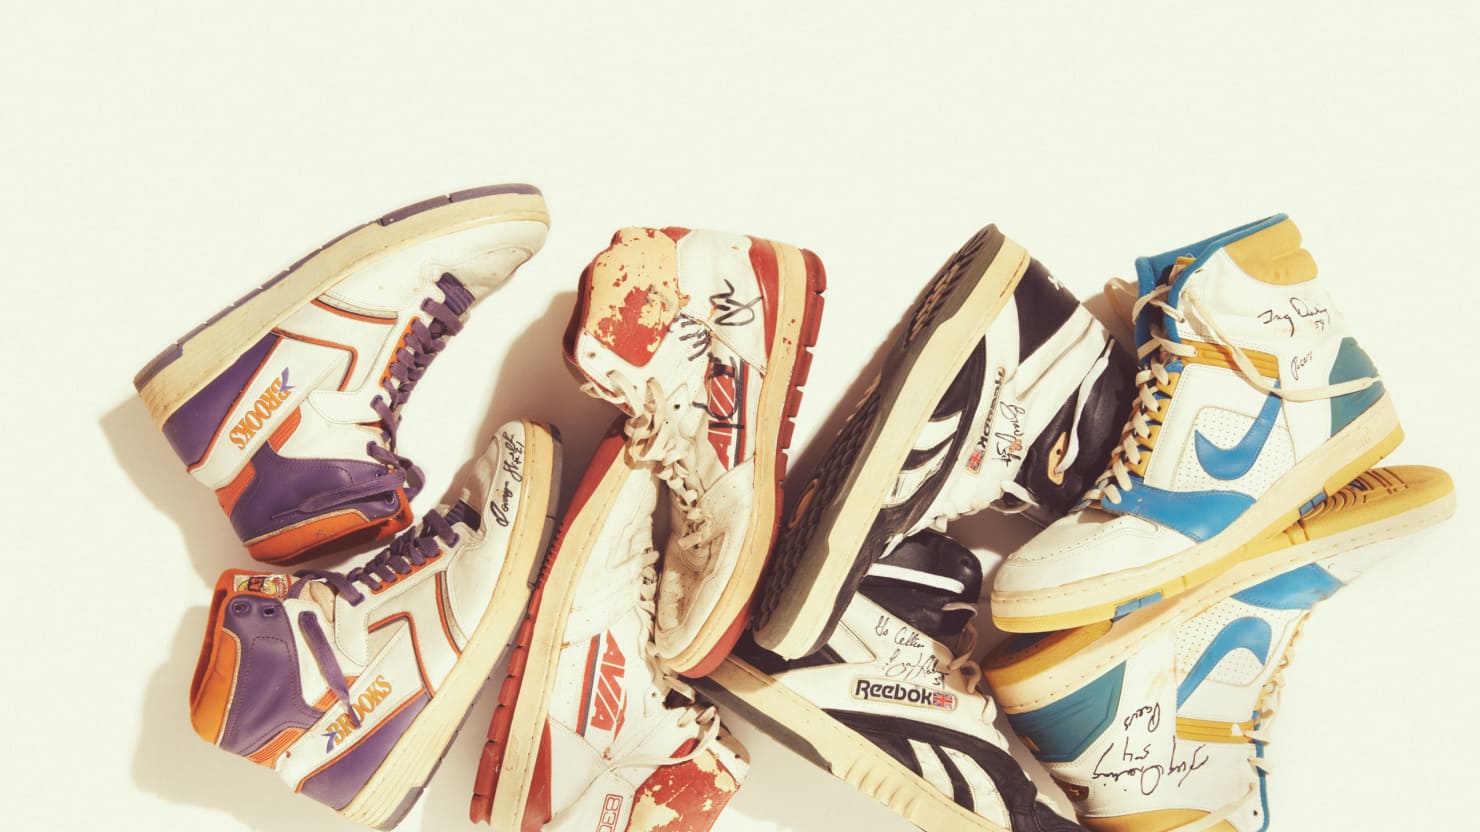 What was the beginning and the boom of the sneaker culture?